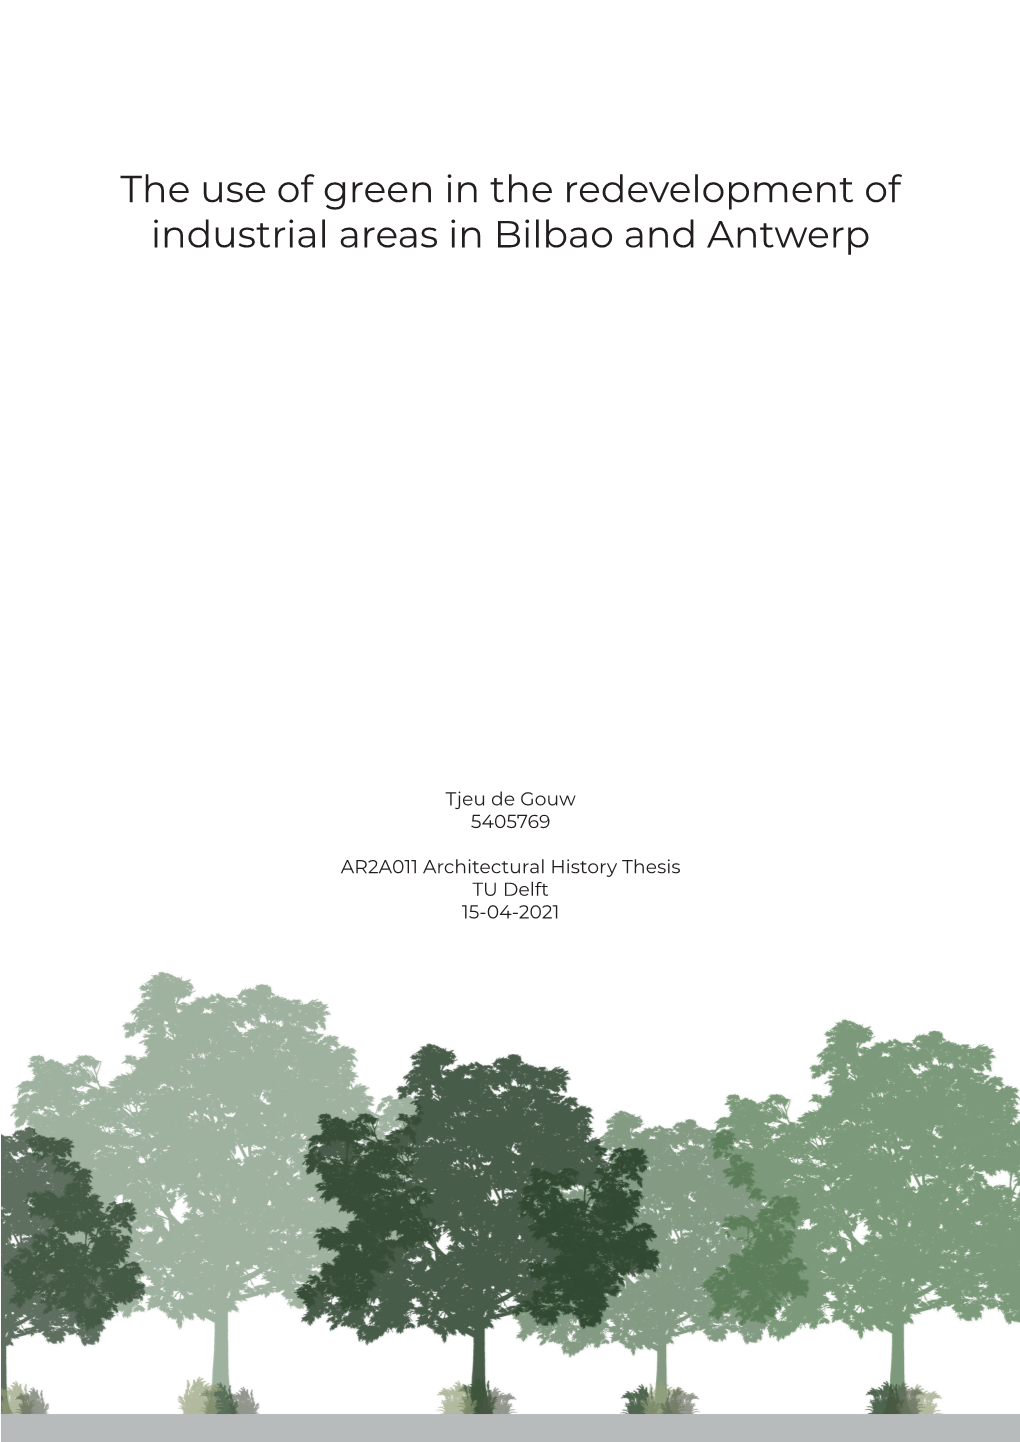 The Use of Green in the Redevelopment of Industrial Areas in Bilbao and Antwerp